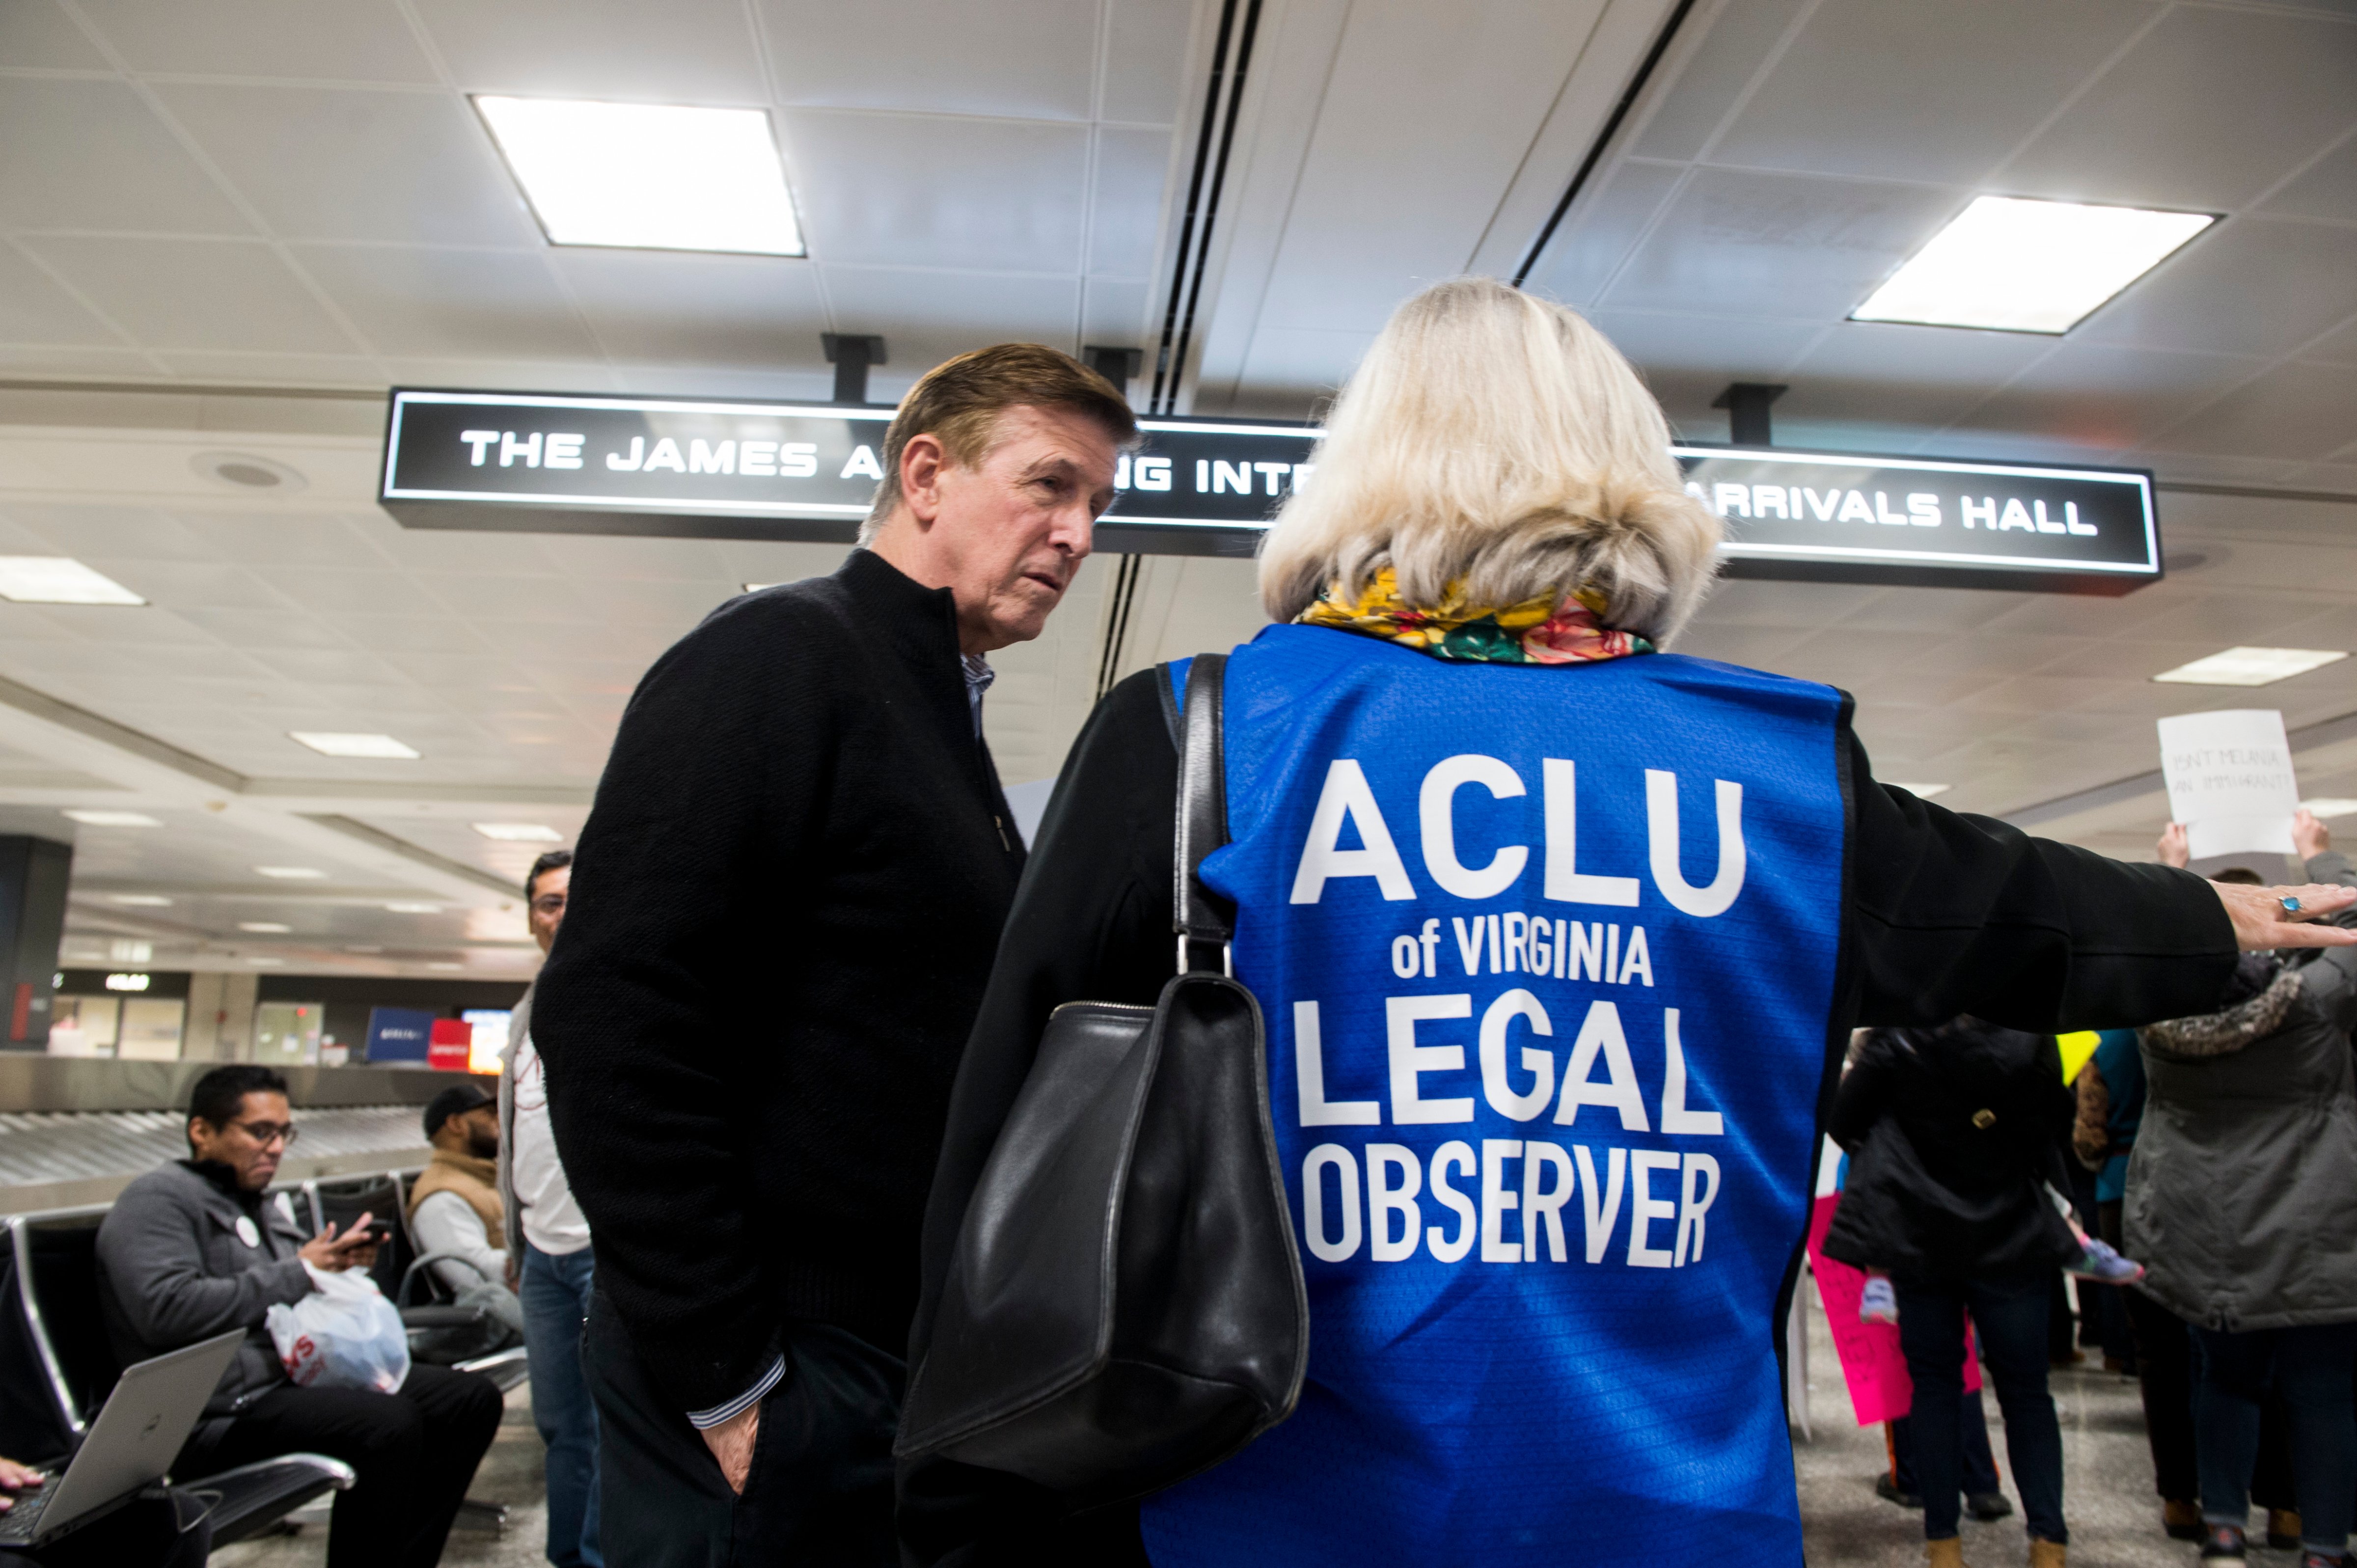 UNITED STATES - JANUARY 29: Rep. Don Beyer, D-Va., speaks with an ACLU legal observer during the protest at Dulles International Airport in Virginia on Sunday, Jan. 29, 2017. Protests erupted at airports around the country following President Trump's executive order restricting travel from several Islamic countries. (Bill Clark/CQ-Roll Call,Inc.)